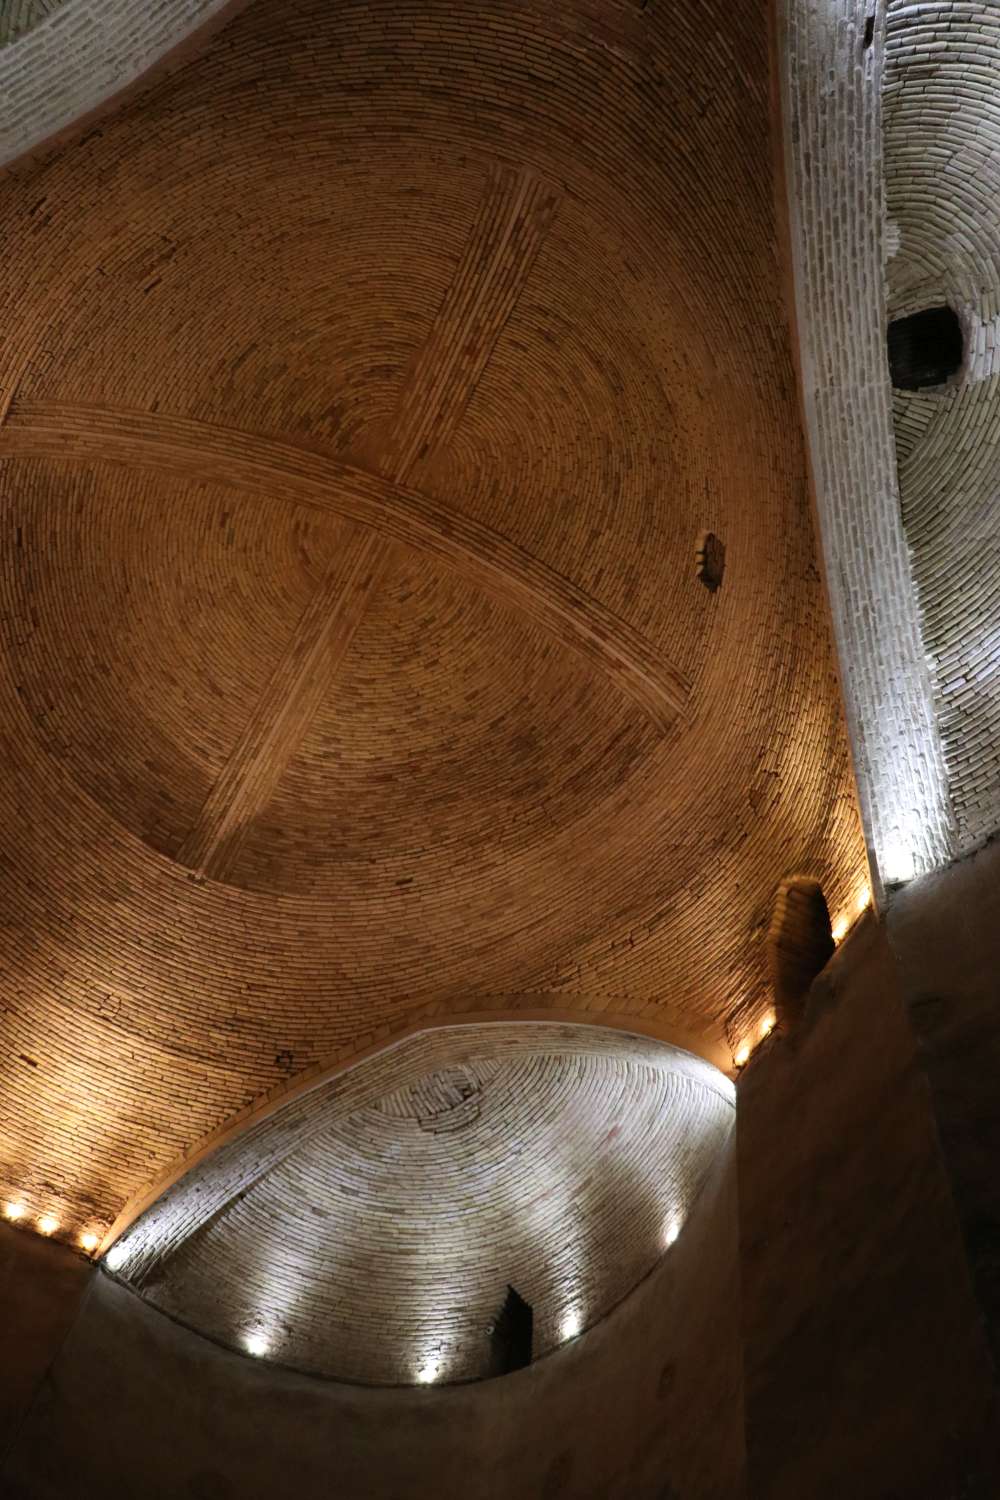 Dome of cistern.